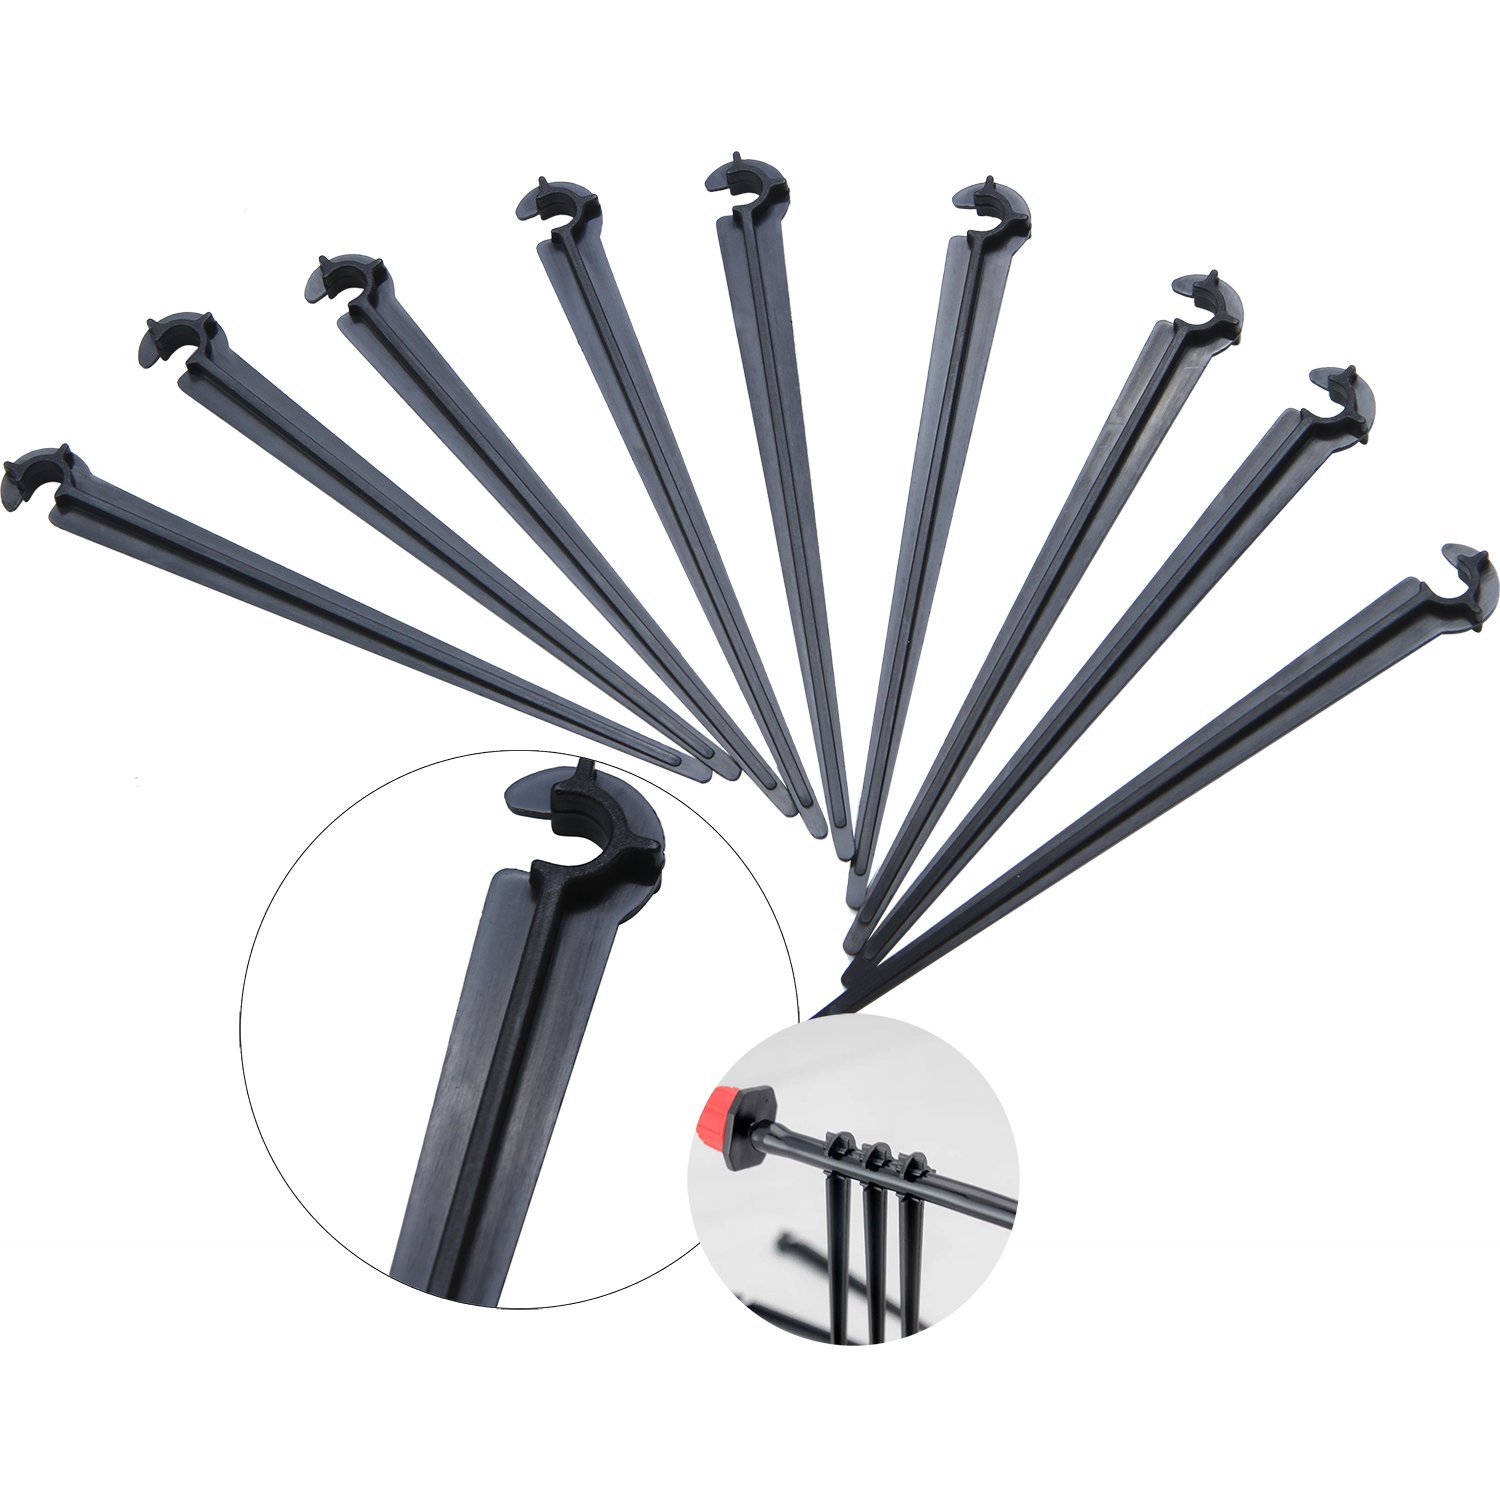 

50Pcs Irrigation Drip Support Stakes 1/4 Inch Tubing Hose Holder for Vegetable Gardens or Flower Beds Water Flow Drip Irrigation System